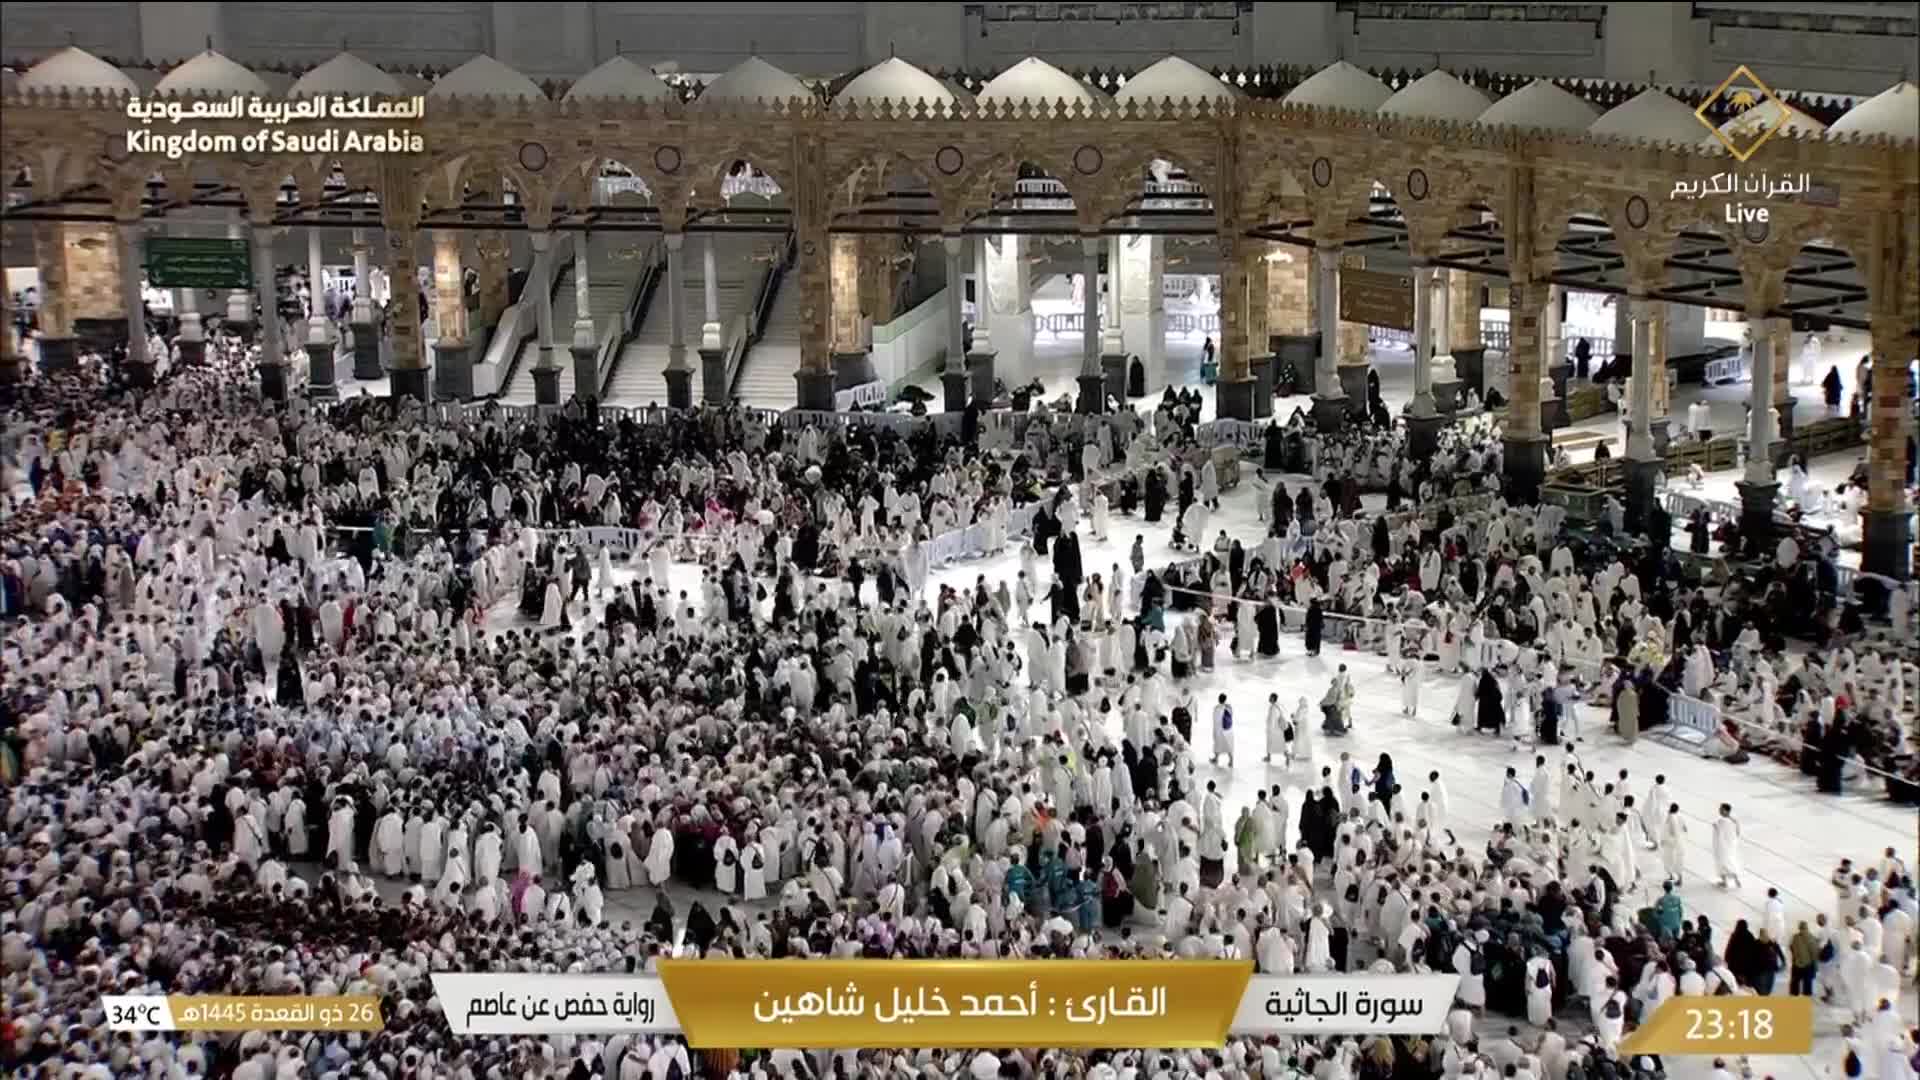 Mecca Wed. 23:36